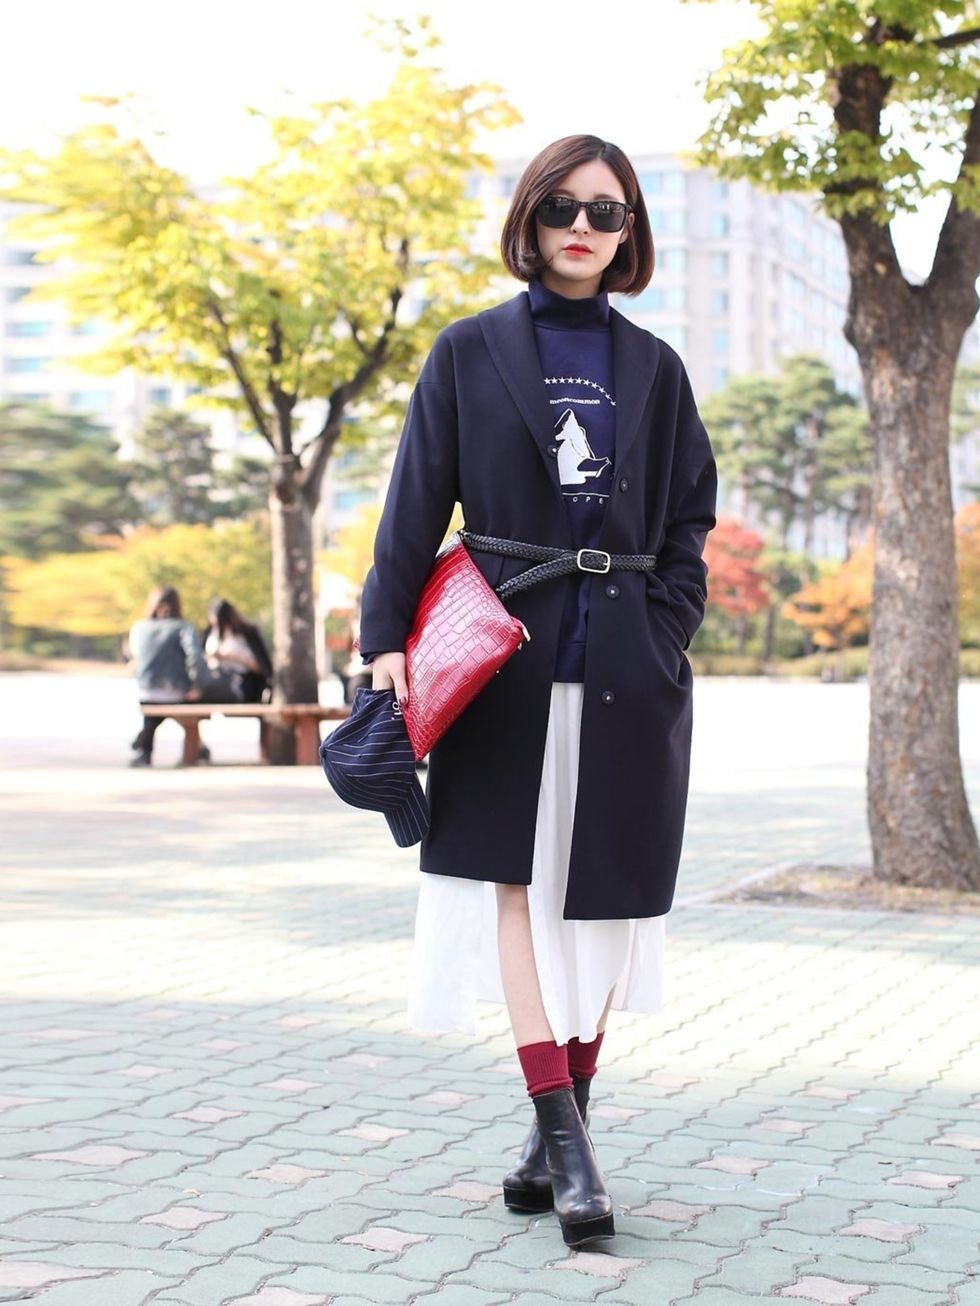 <p>Jang Dayeon38 Come On Common sweater, Low Classic cap.</p><p><a href="http://www.elleuk.com/style/street-style/frieze-london-2013-street-style-art-fair"></a></p><p><a href="http://www.elleuk.com/style/street-style/best-of-spring-summer-2014-shows-stree